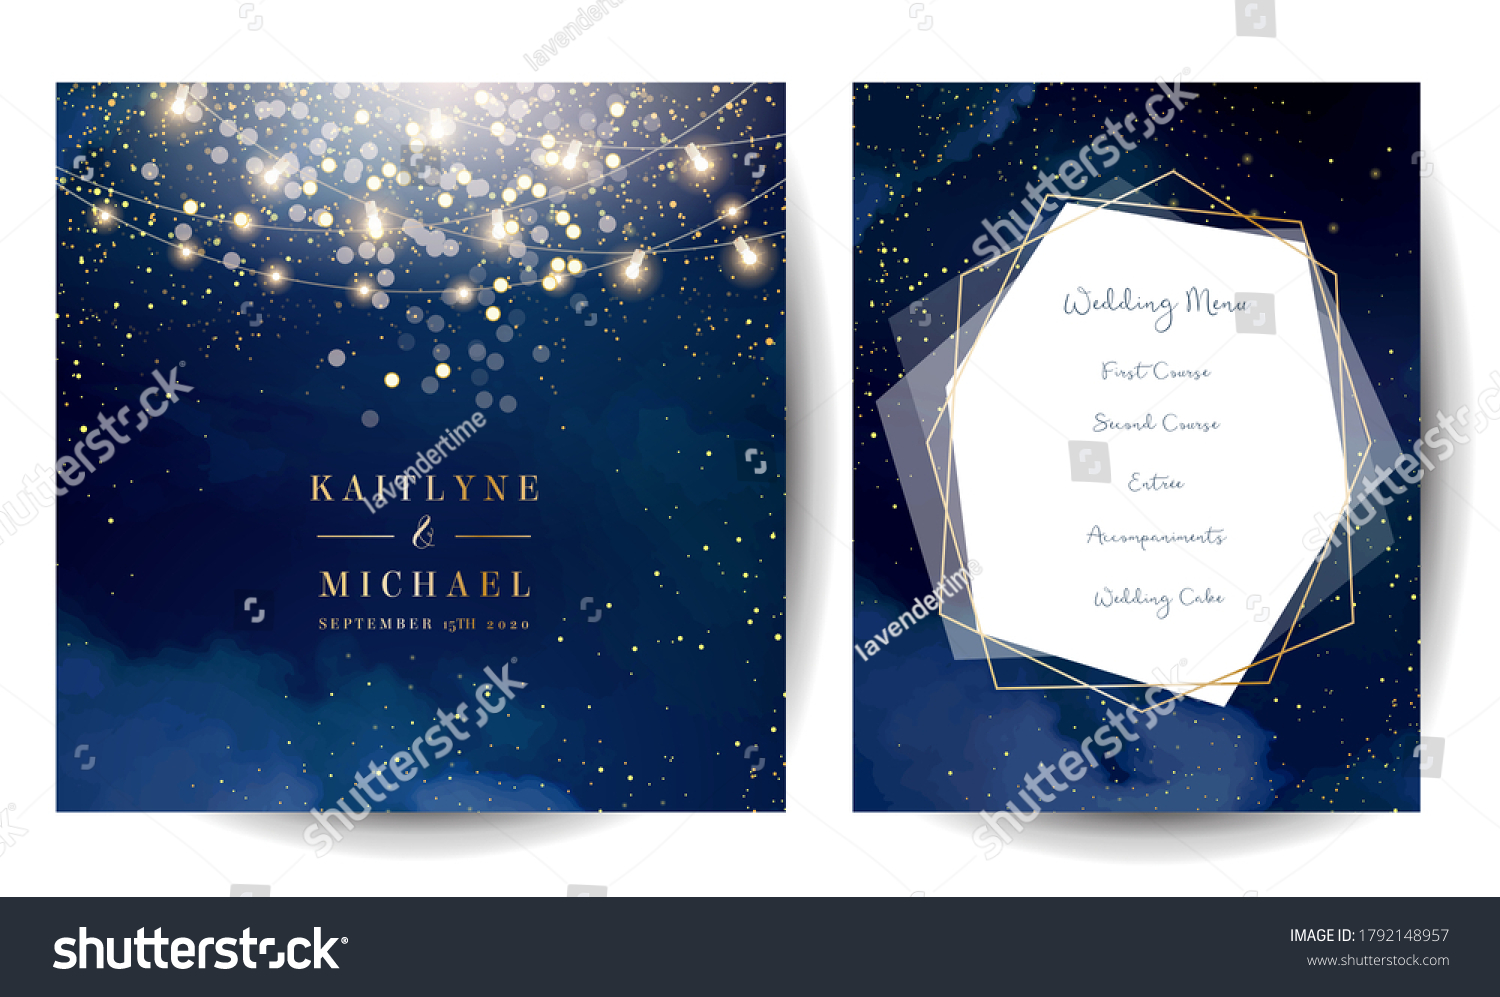 Magic night dark blue cards with sparkling glitter bokeh and line art. Diamond shaped vector wedding invitation. Gold confetti and navy background. Golden scattered dust.Fairytale magic star templates #1792148957